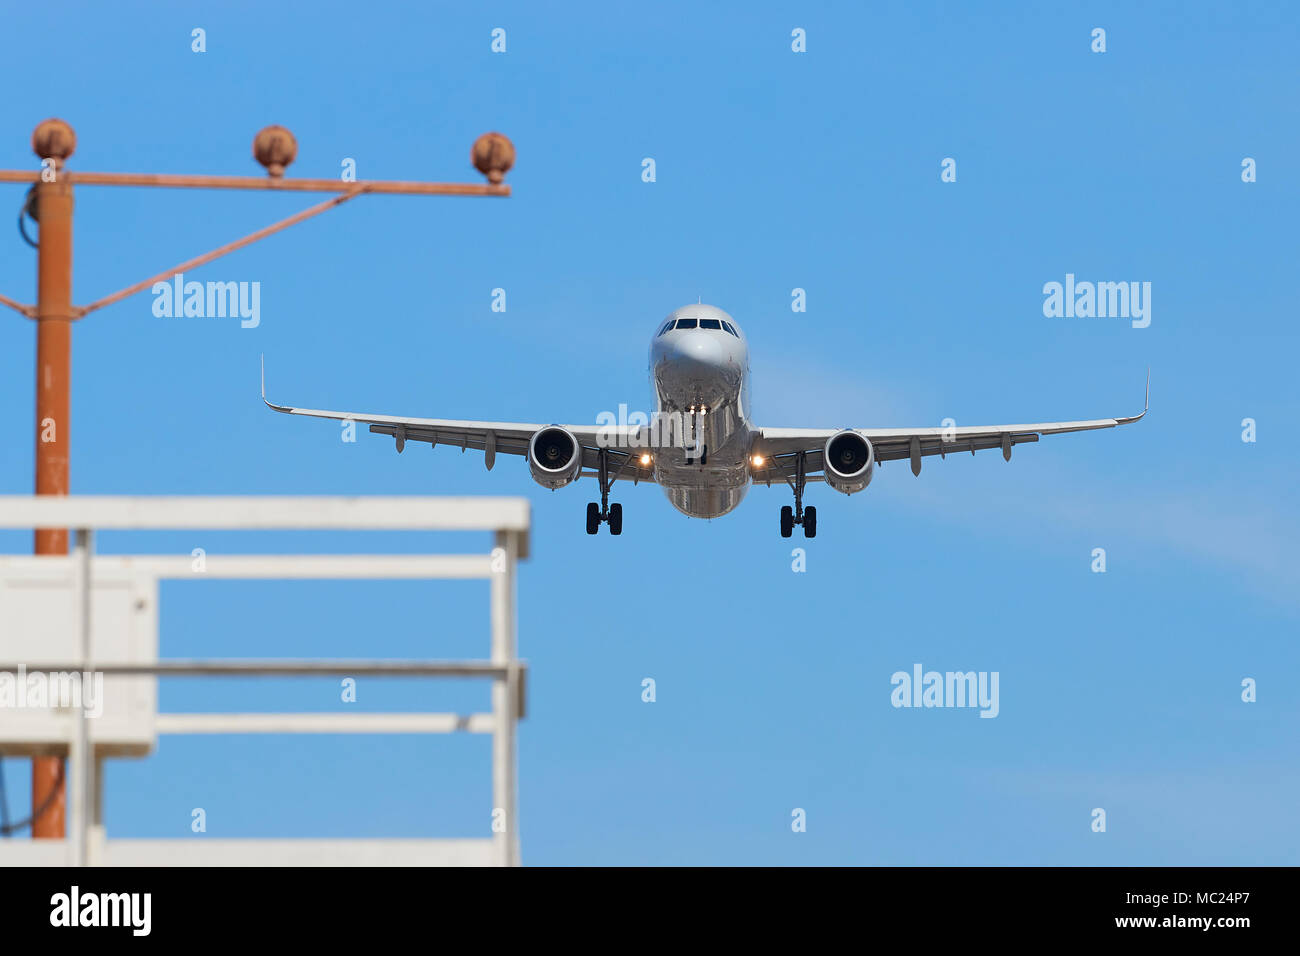 Airbus Passenger Plane On Final Approach Into Los Angeles International Airport, LAX, California, USA. An Approach Lighting Gantry In Foreground. Stock Photo